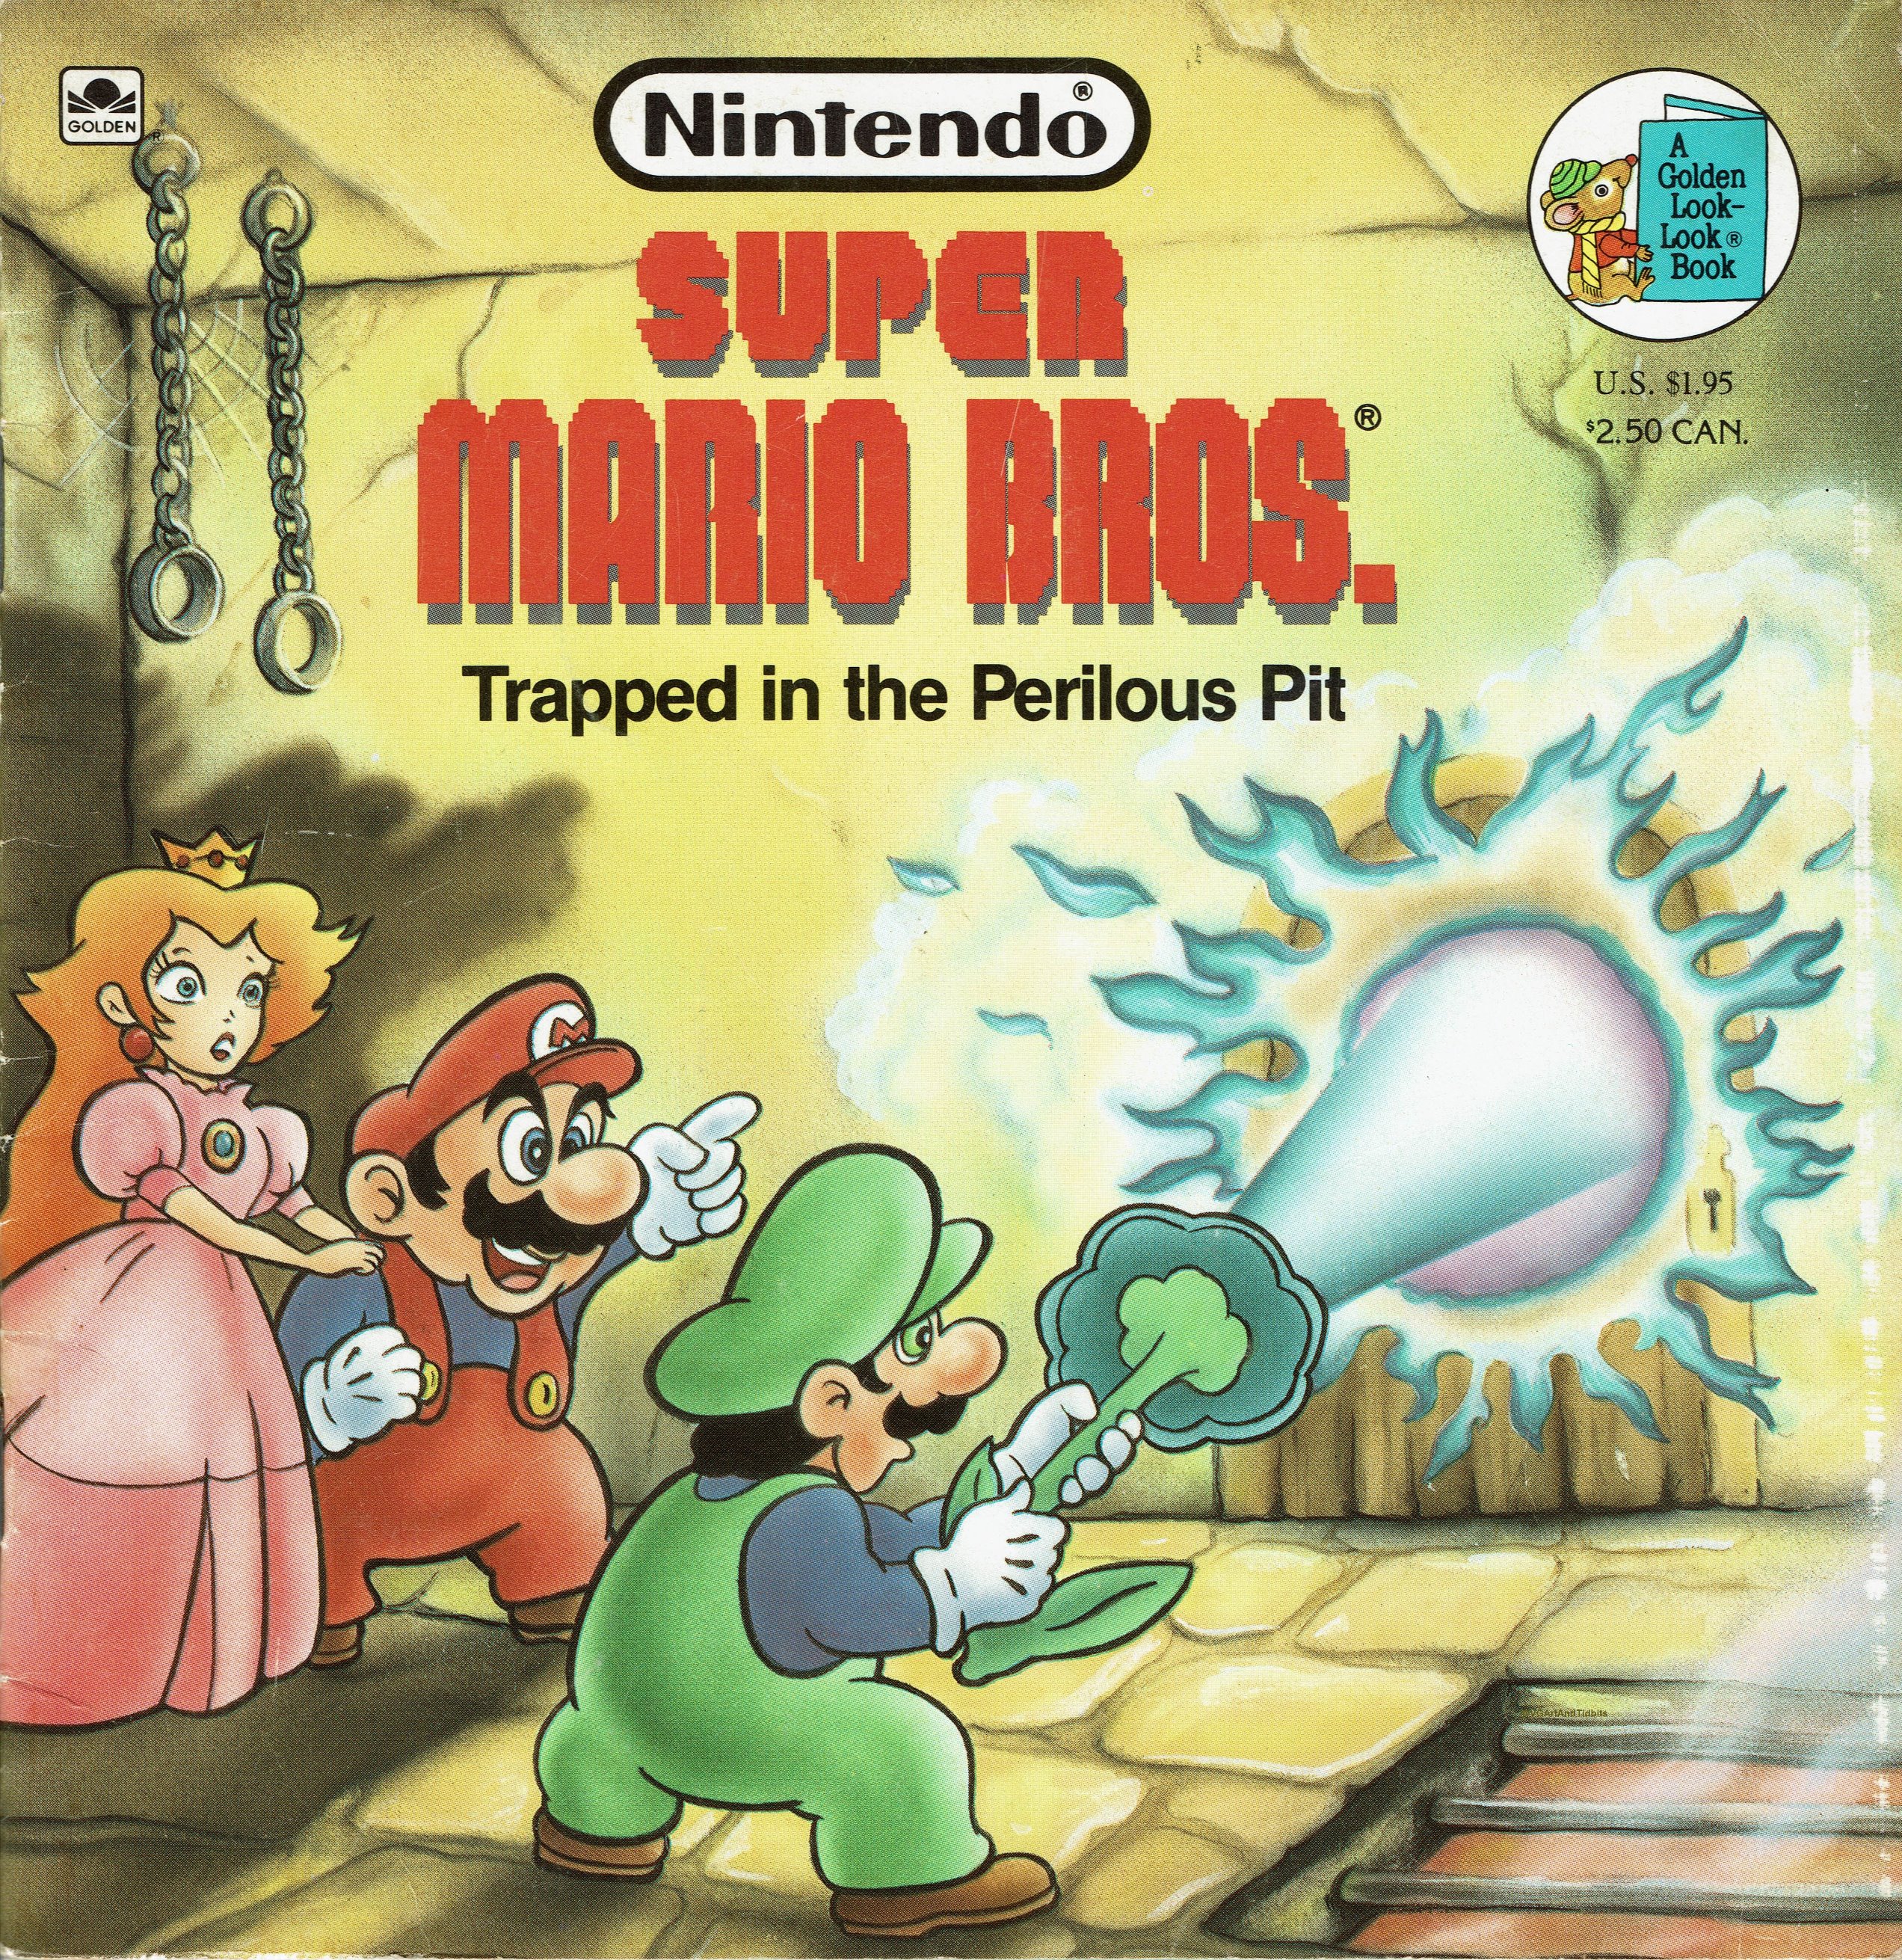 Cover art of Super Mario Bros.: Trapped in the Perilous Pit